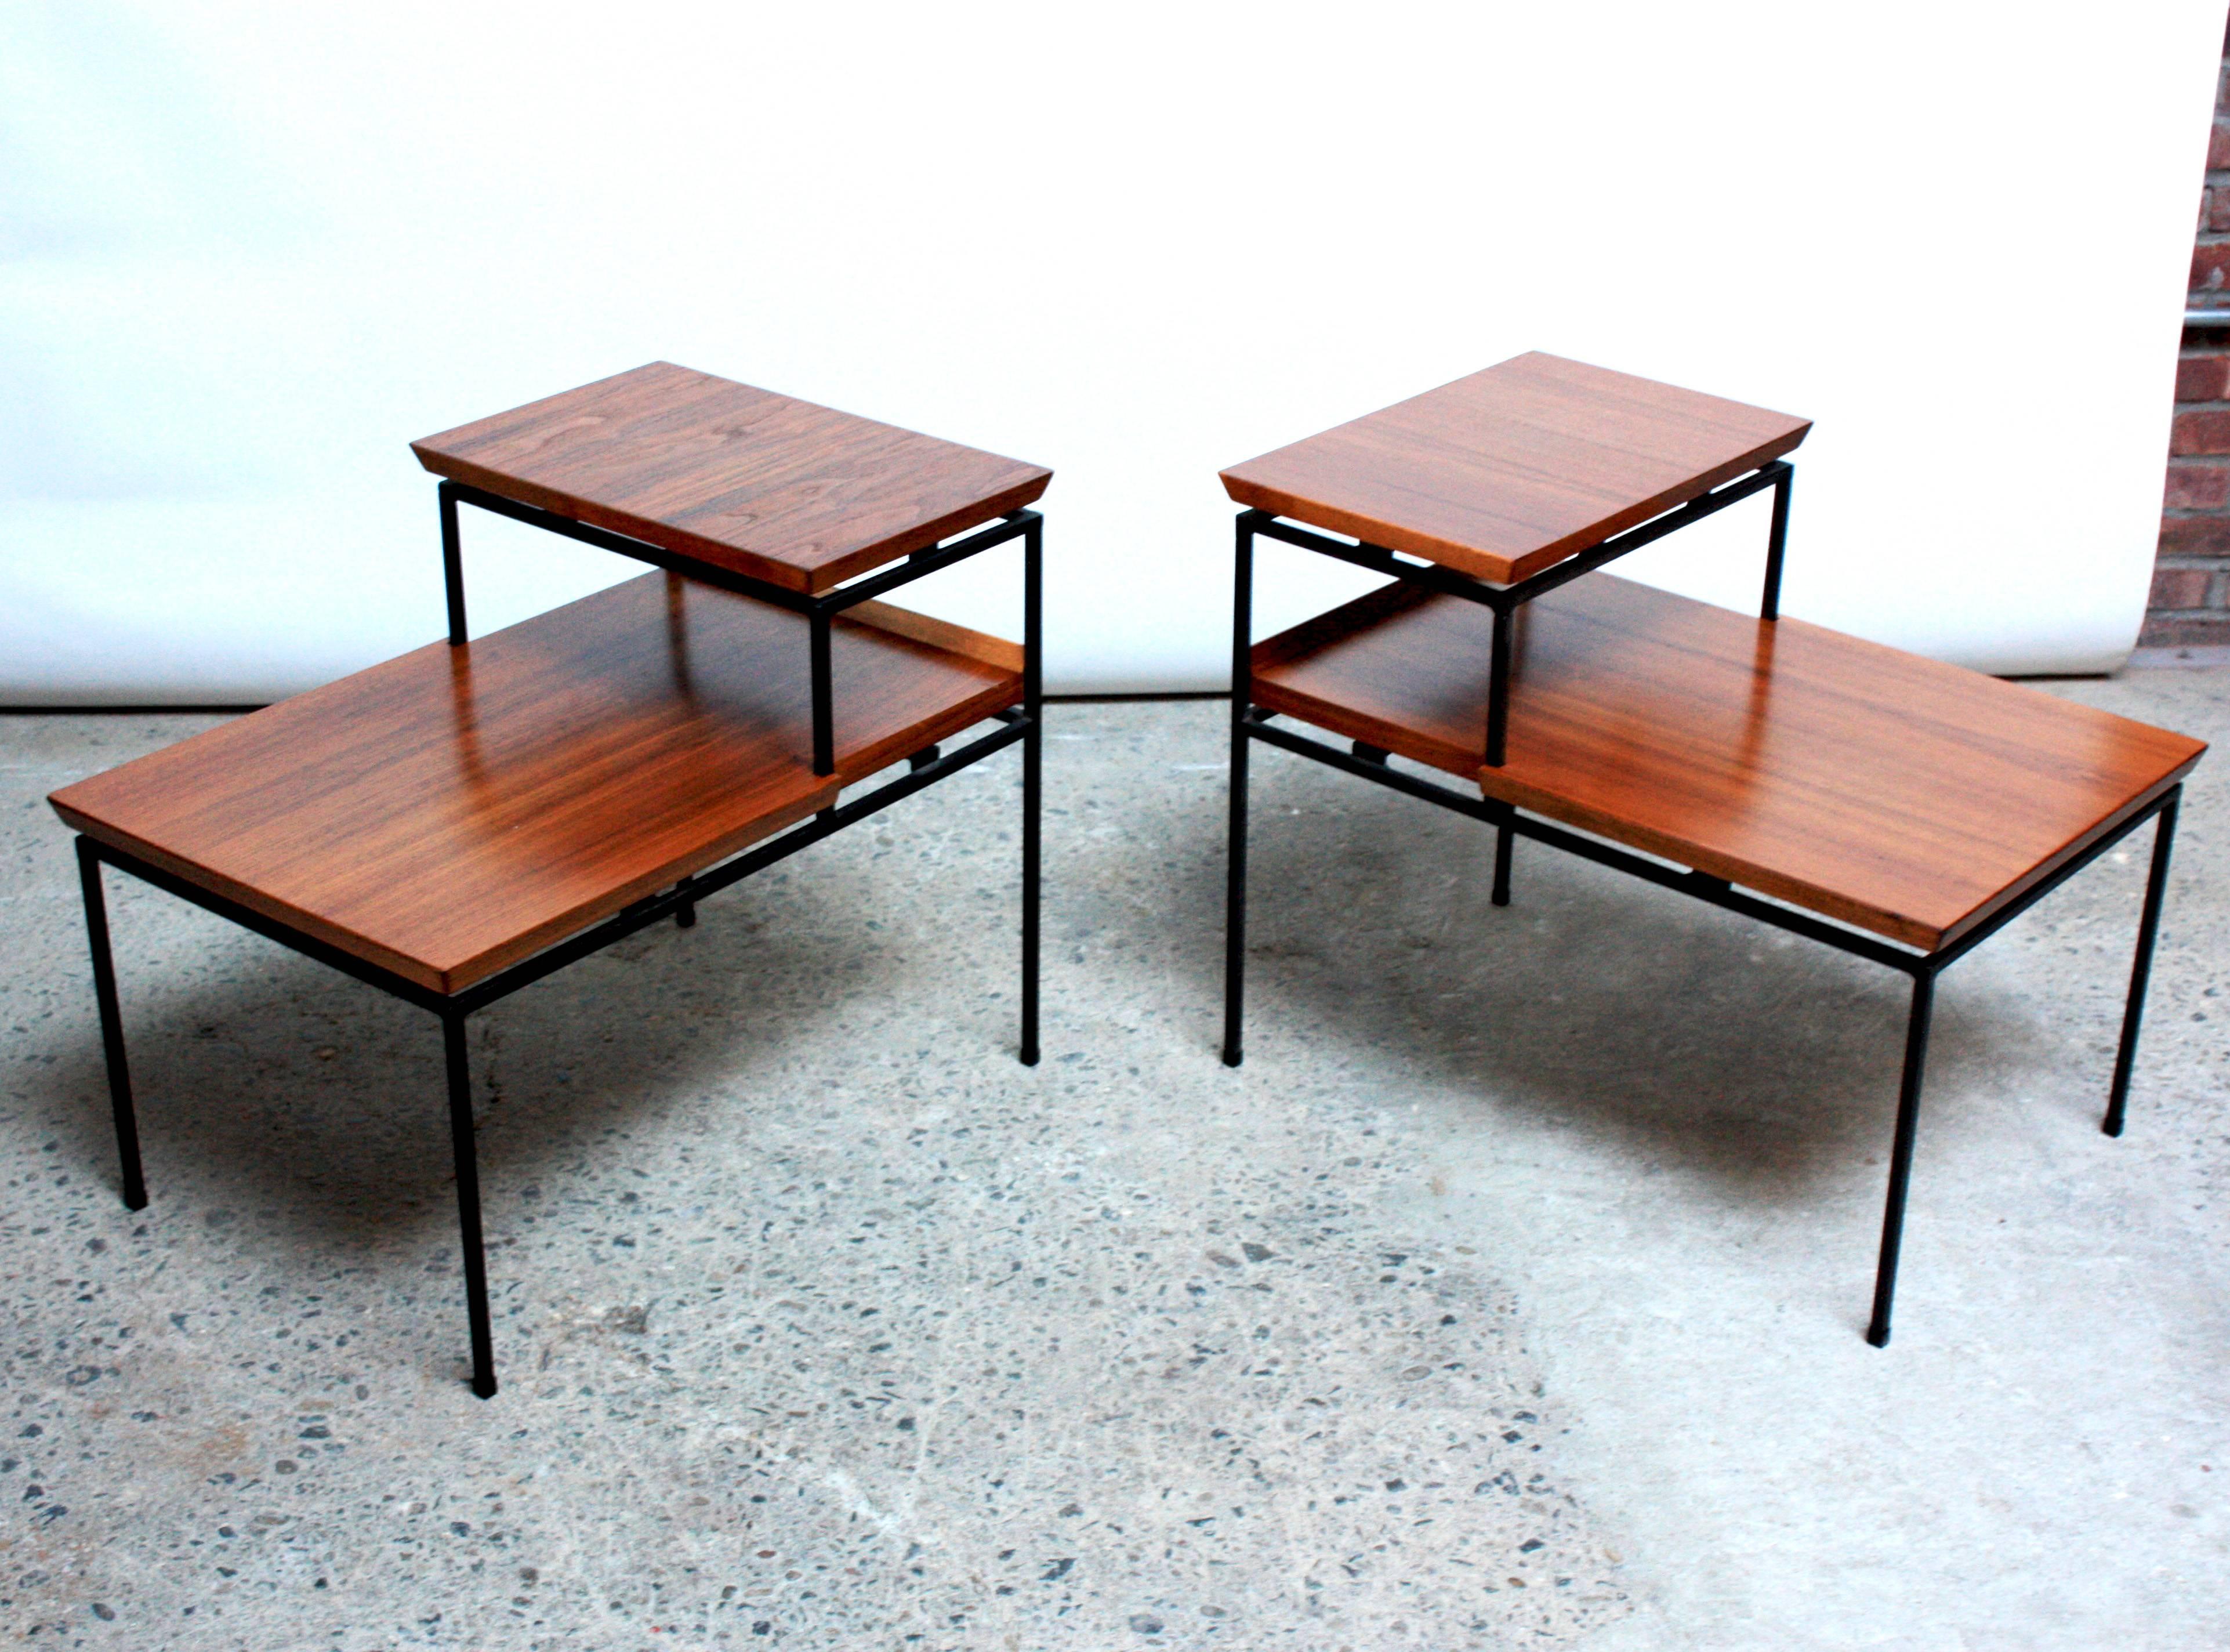 These minimal side tables comprised of iron frames and walnut tops were designed and manufactured by the Furnwood Corporation of Brockton, MA in the 1950s. Furnwood Corp was a very small company, and these pieces are rarely seen and hardly ever